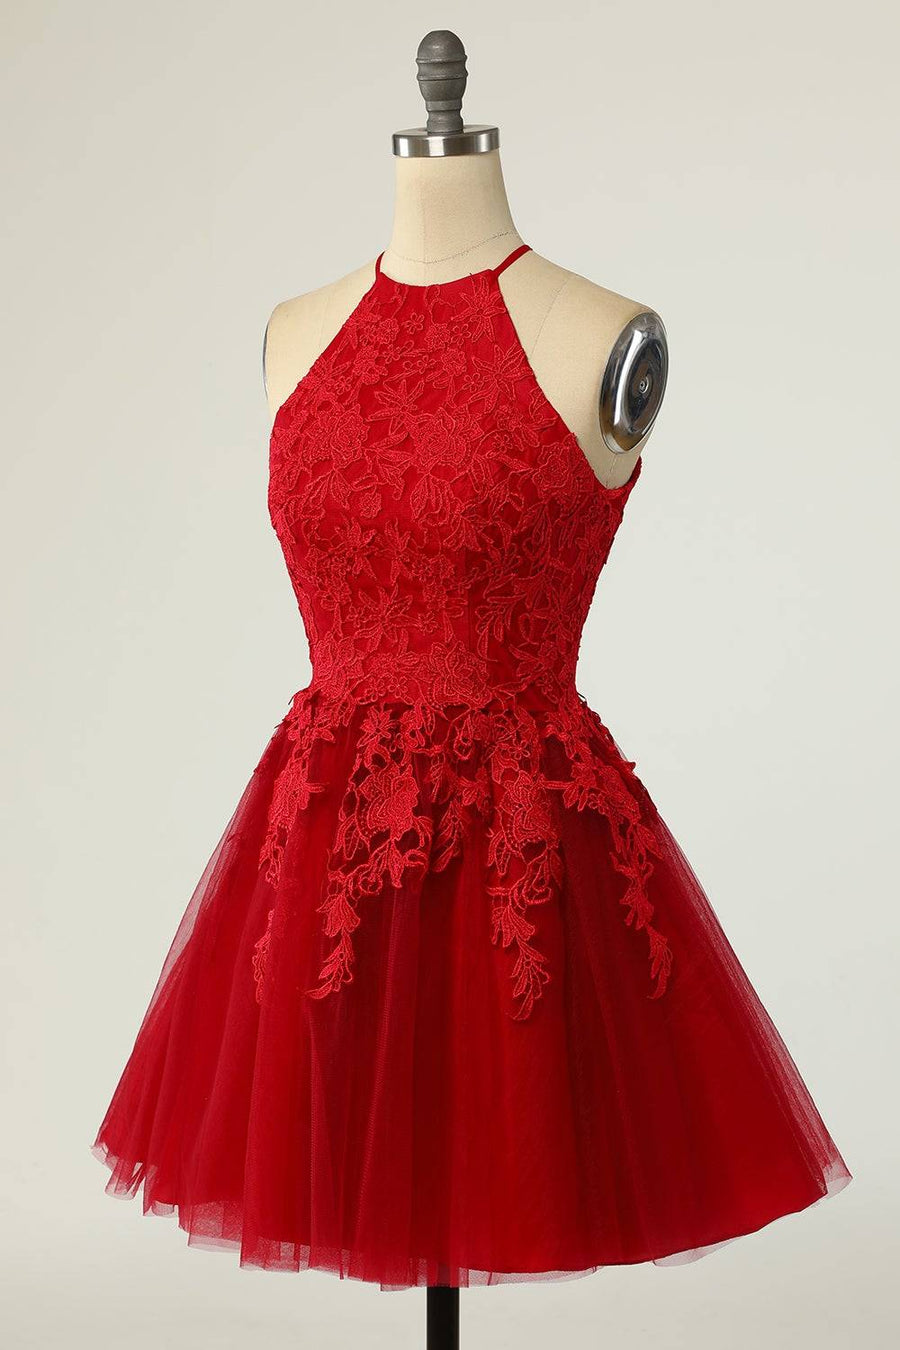 Red A-line Halter Keyhole Back Applique Mini Homecoming Dress]